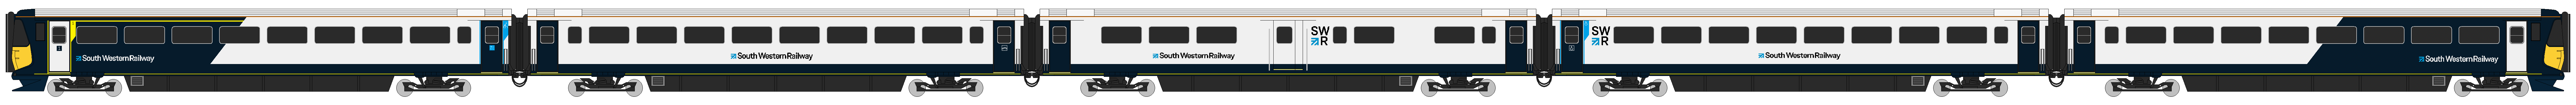 South_Western_Railway_class_442.png